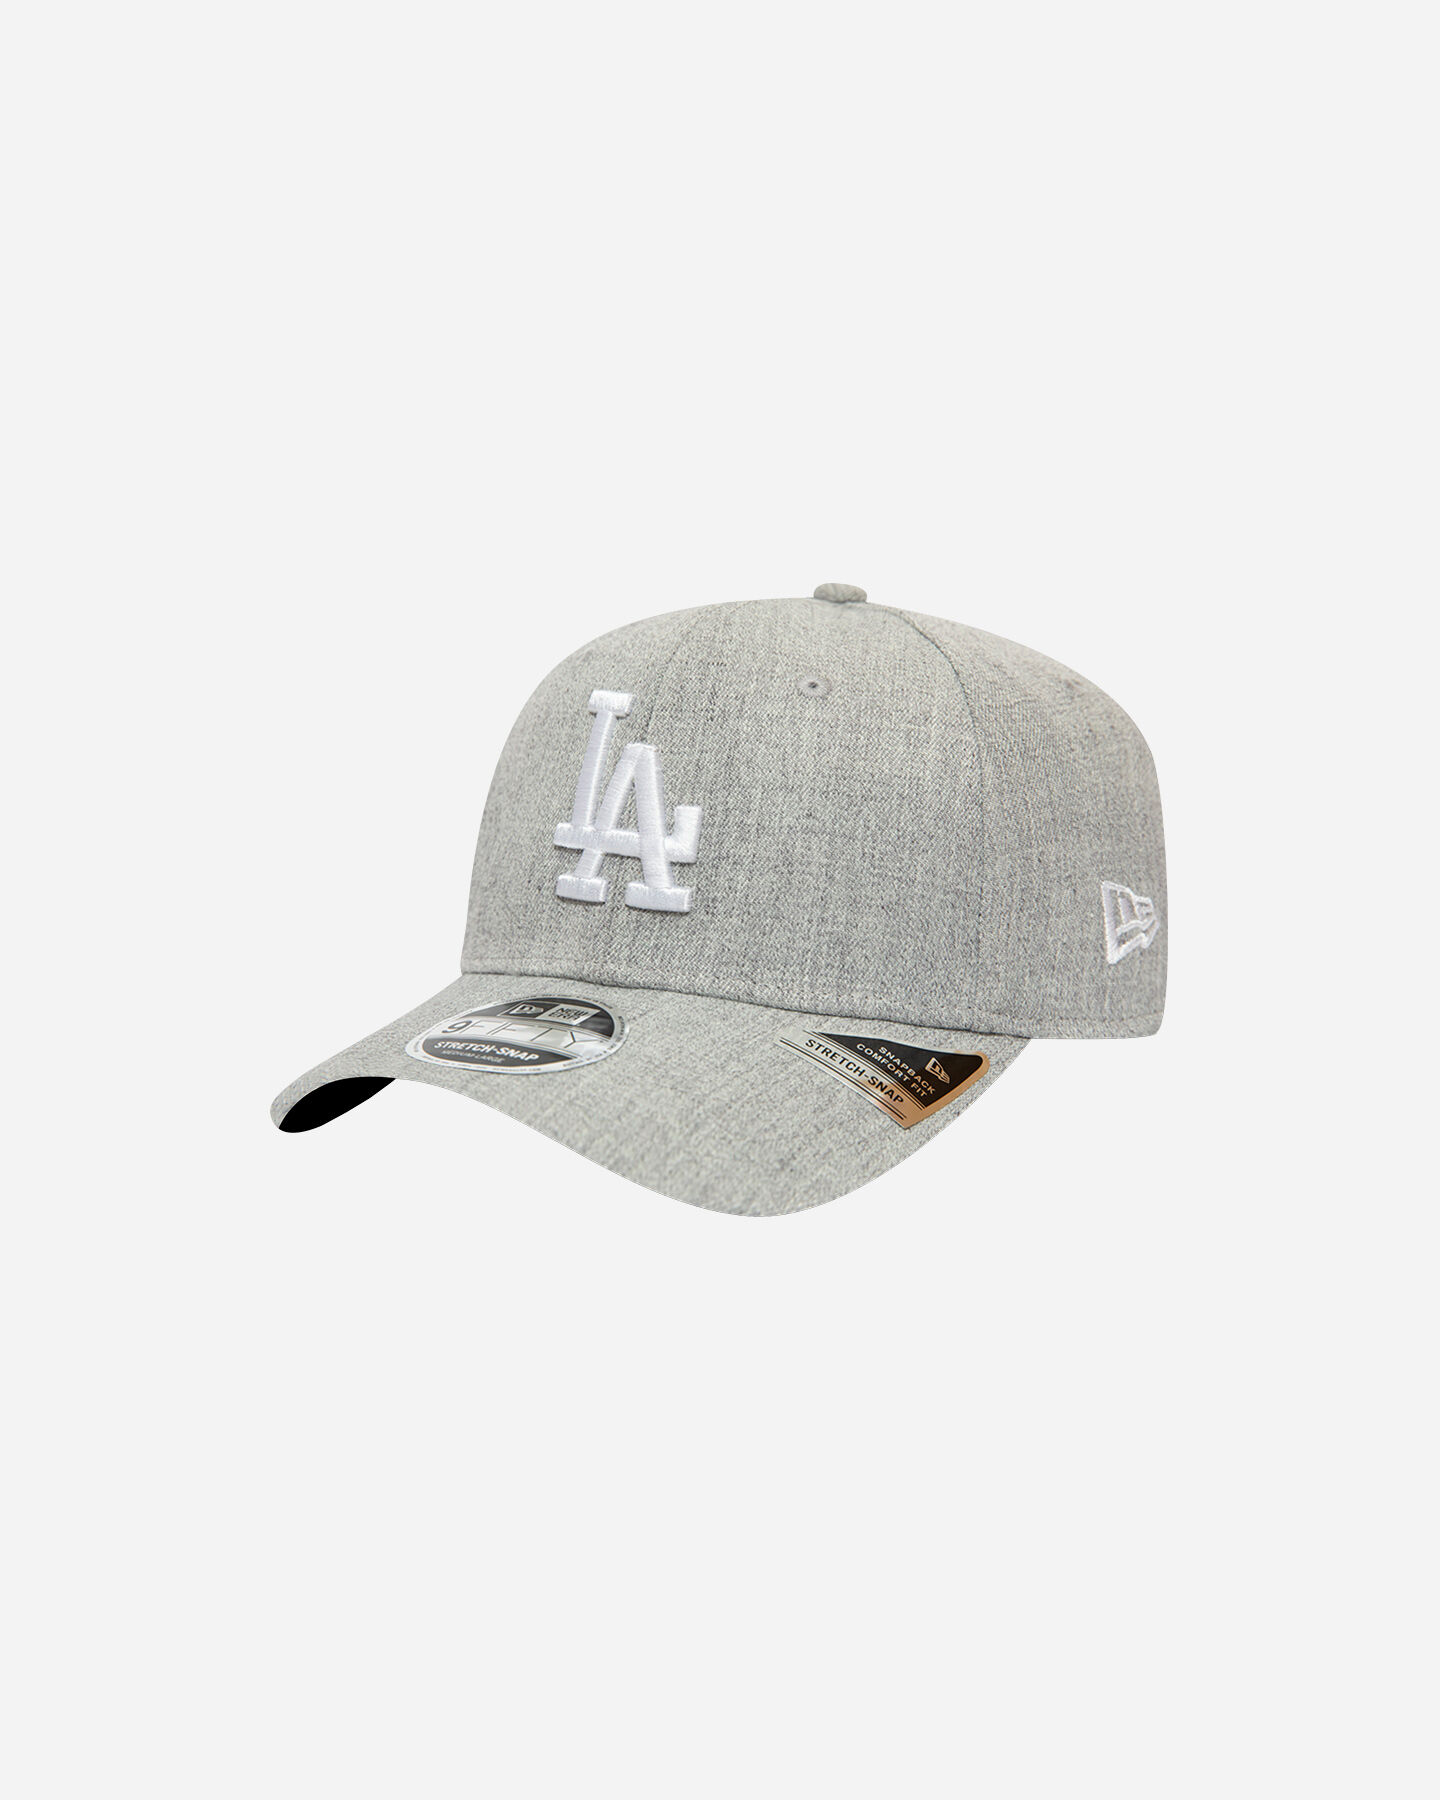  Cappellino NEW ERA LOS ANGELES DODGERS 9FIFTY HEATHER BASE S5170126|030|SM scatto 0